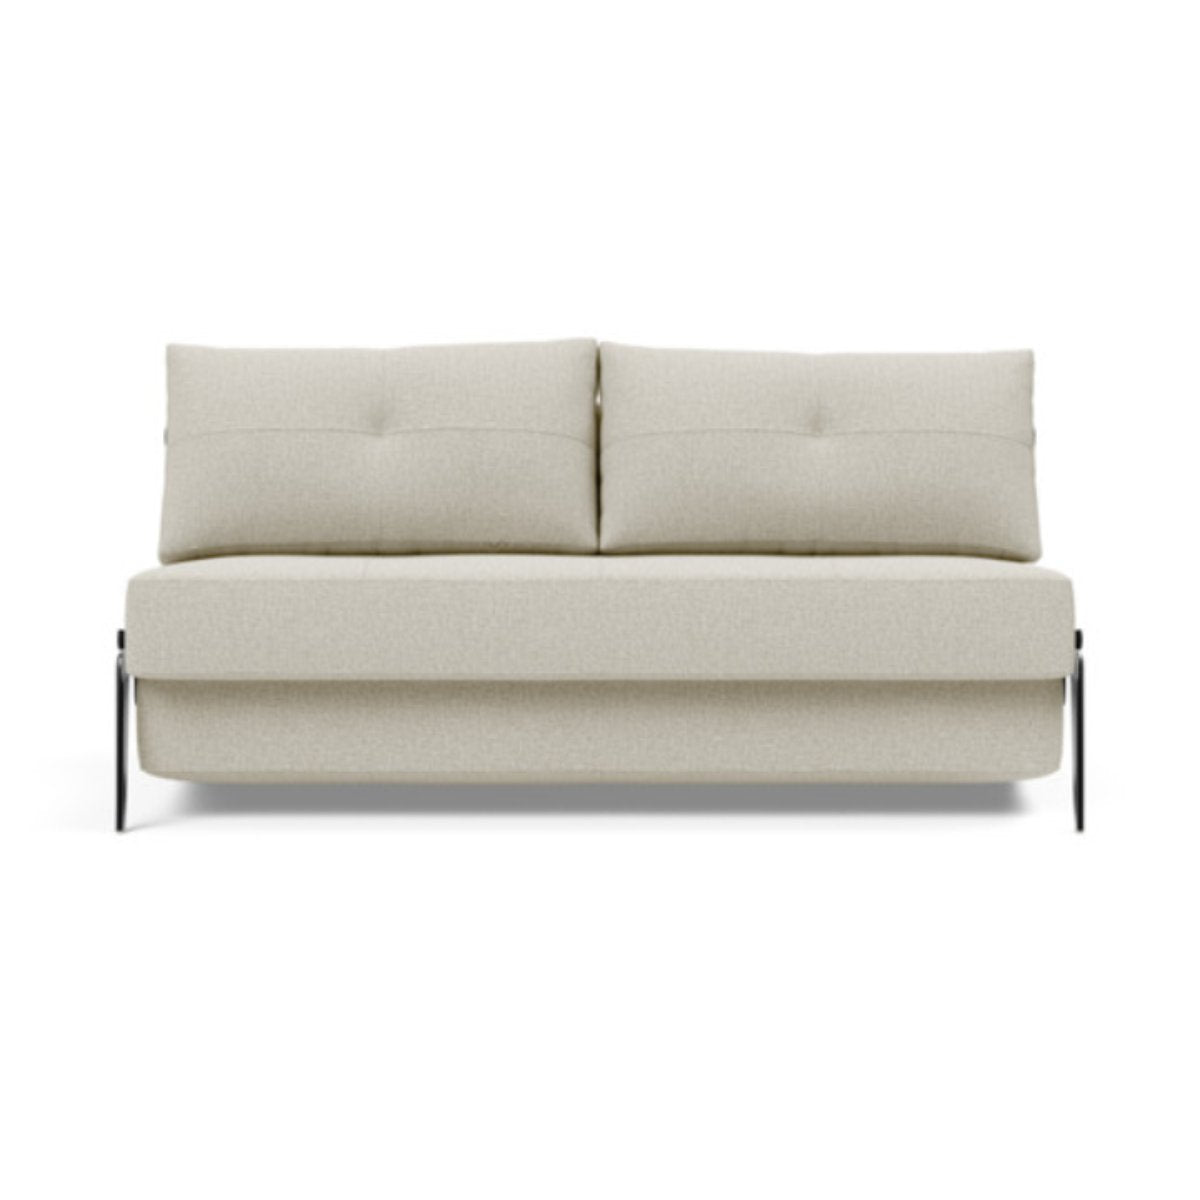 Cubed Queen Size Sofa Bed With Alu Legs 527 Mixed Dance NaturalSofa Beds INNOVATION  527 Mixed Dance Natural   Four Hands, Burke Decor, Mid Century Modern Furniture, Old Bones Furniture Company, Old Bones Co, Modern Mid Century, Designer Furniture, https://www.oldbonesco.com/